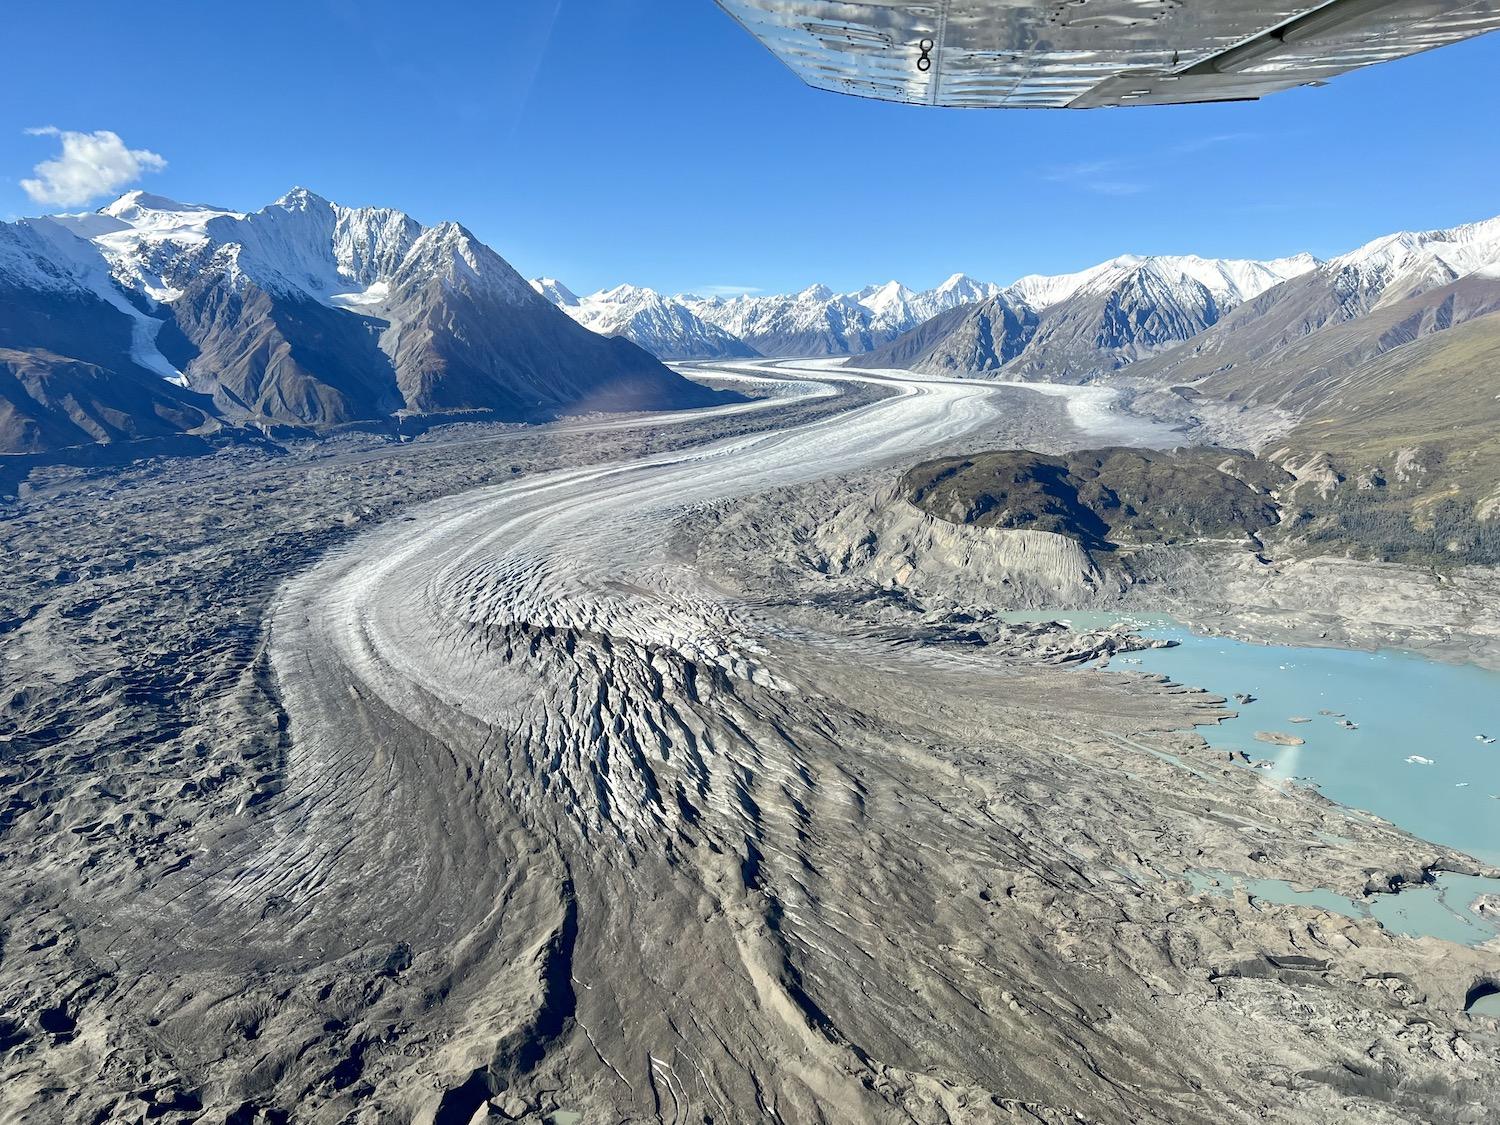 Views of the Kaskawulsh Glacier and St. Elias Mountains while on a flightseeing tour with Icefield Discovery.